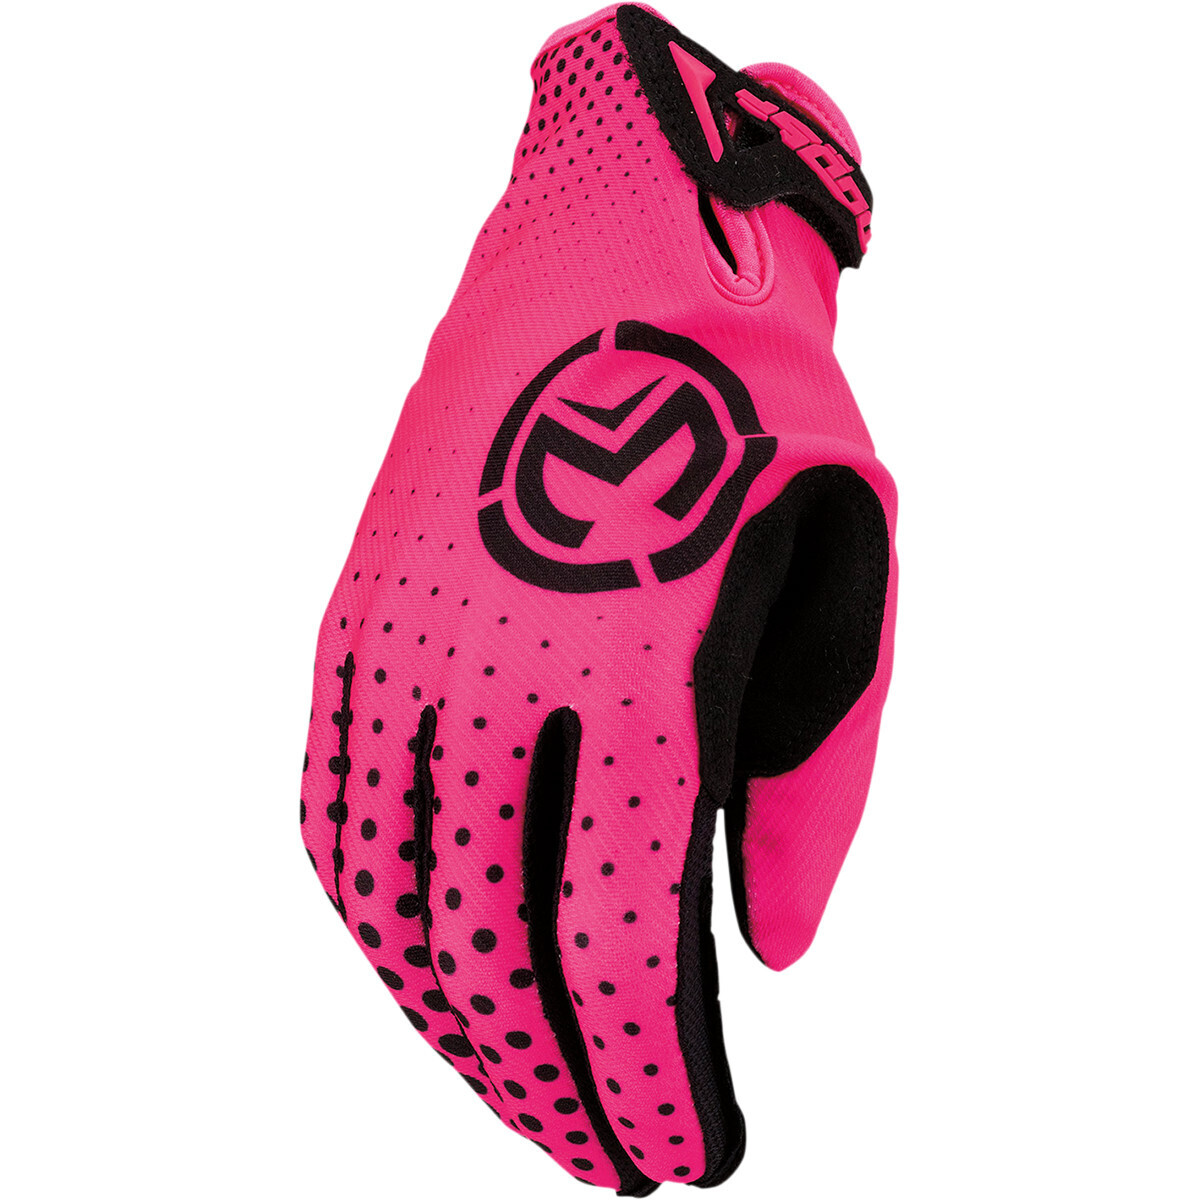 MOOSE GLOVE YOUTH SX1 PINK